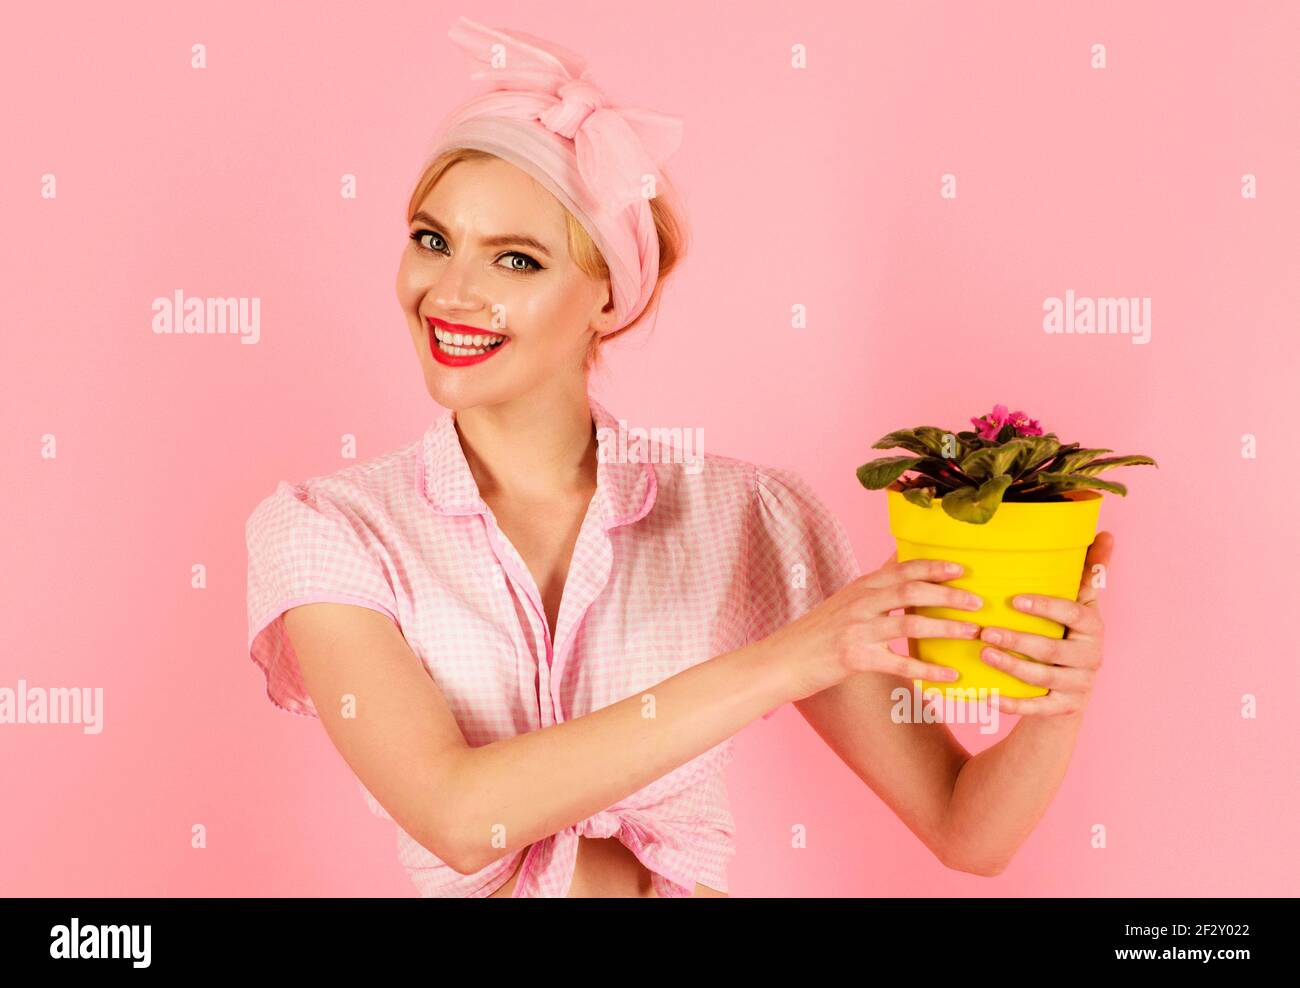 Smiling woman with potted Saintpaulia flower. Girl cultivating flowers. Saintpaulia African violets. Stock Photo